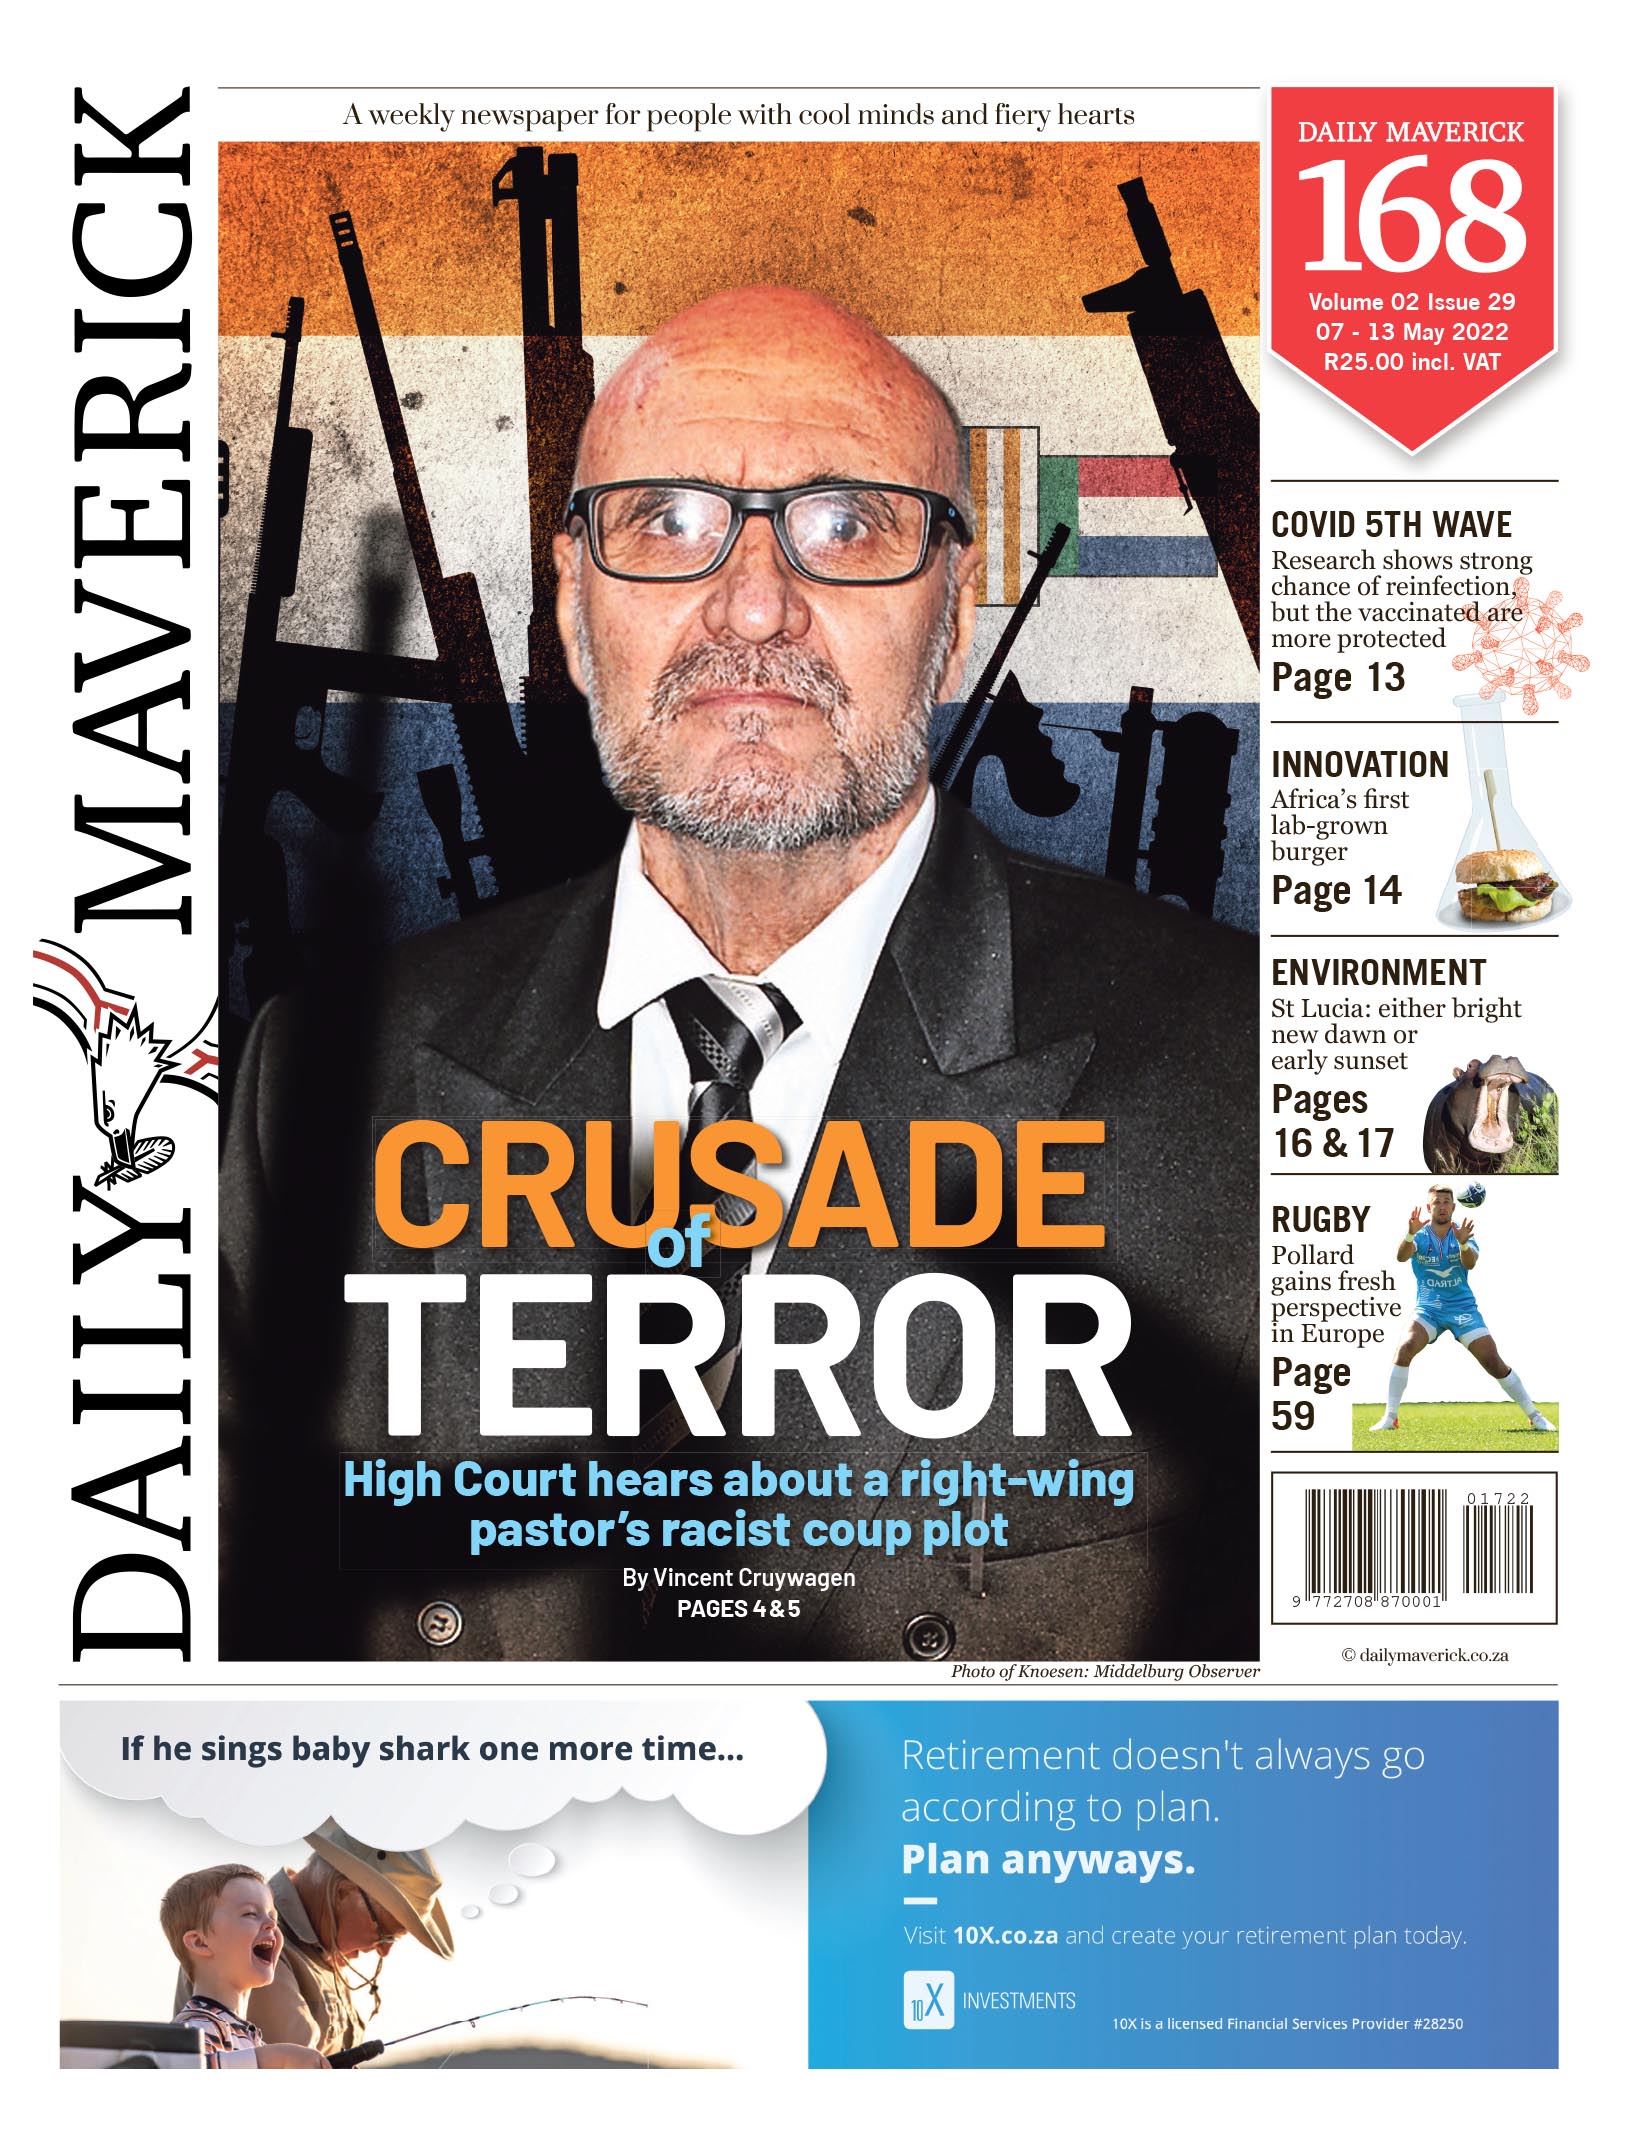 An image of the the front page of the latest edition of Daily Maverick's DM186